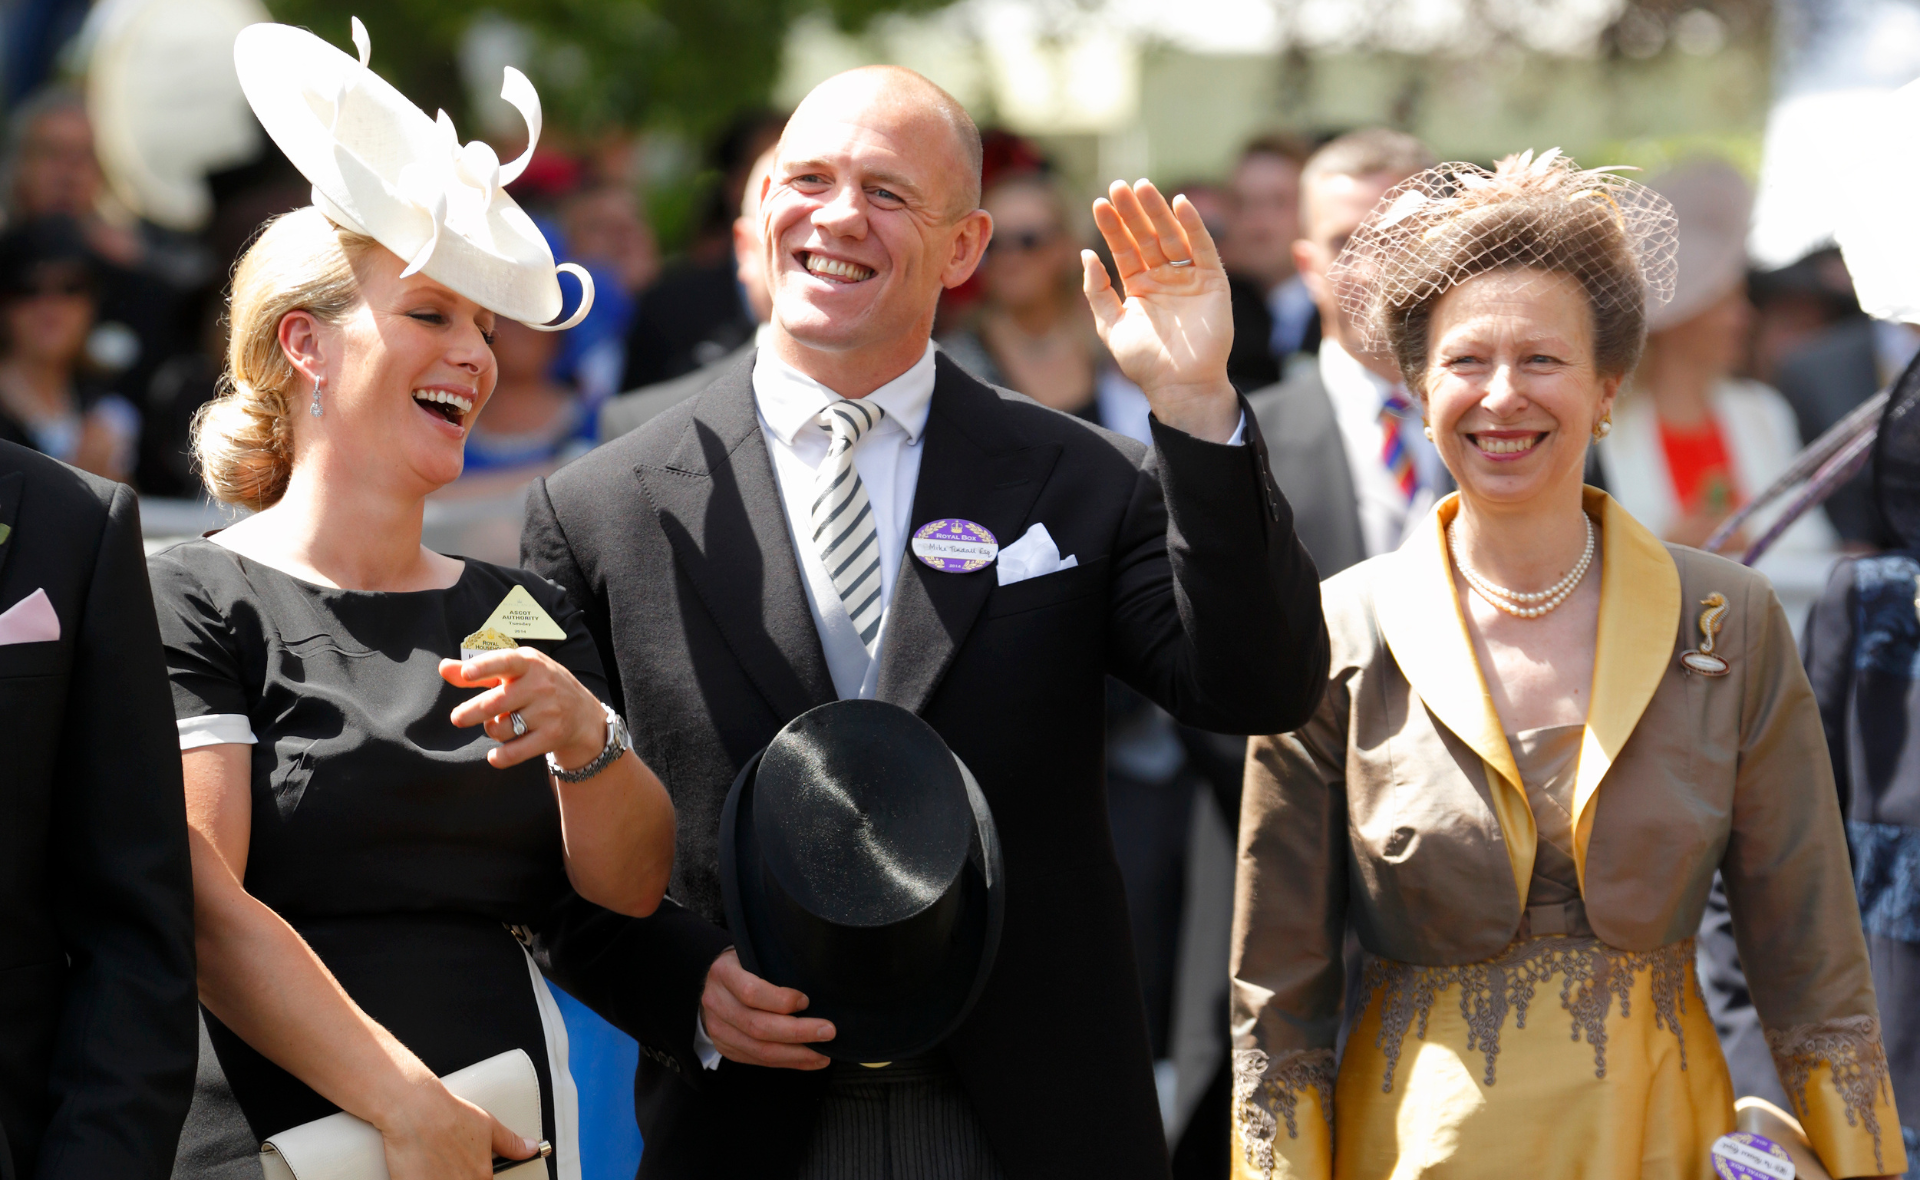 Inside Mike Tindall’s strong bond with his mother-in-law Princess Anne